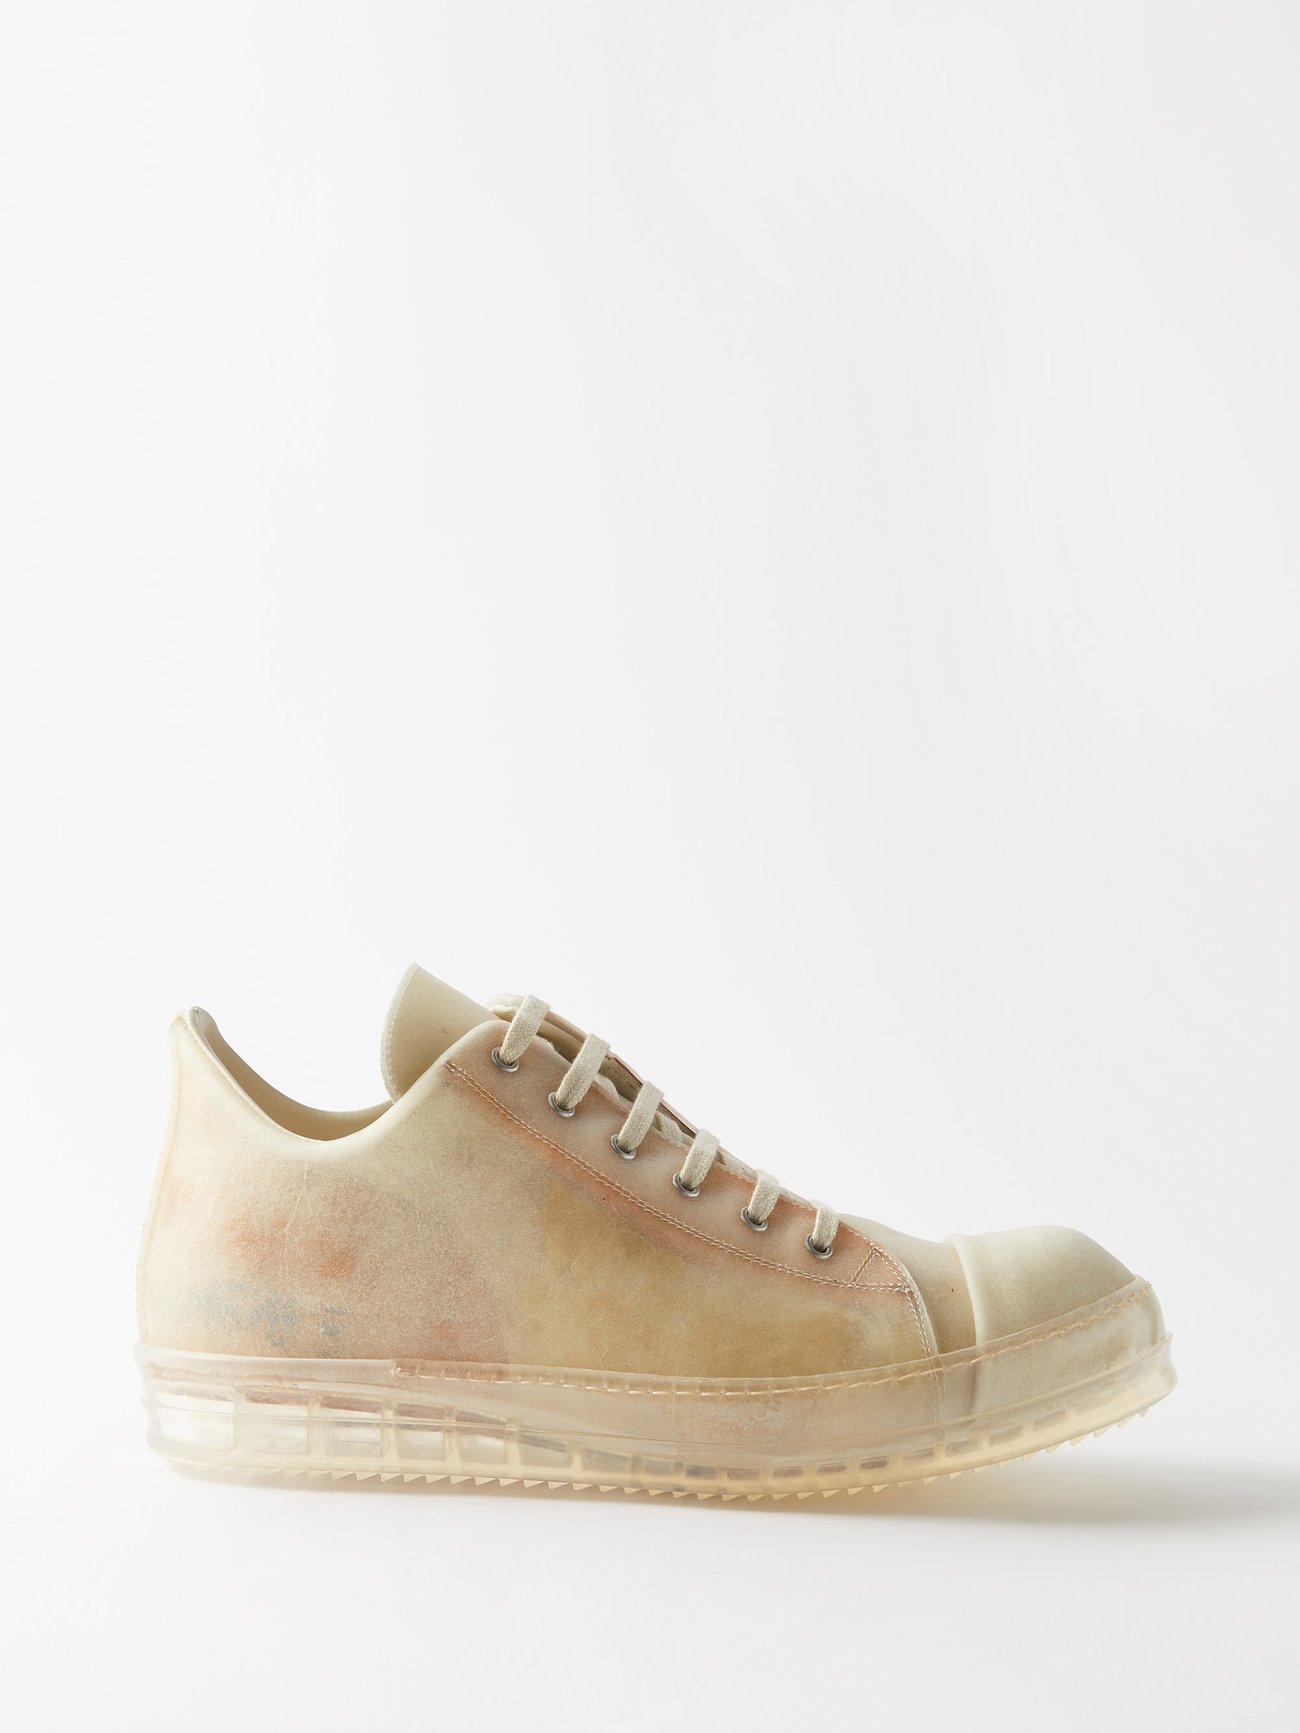 White Ramones Scarpe leather high-top trainers | Rick Owens ...